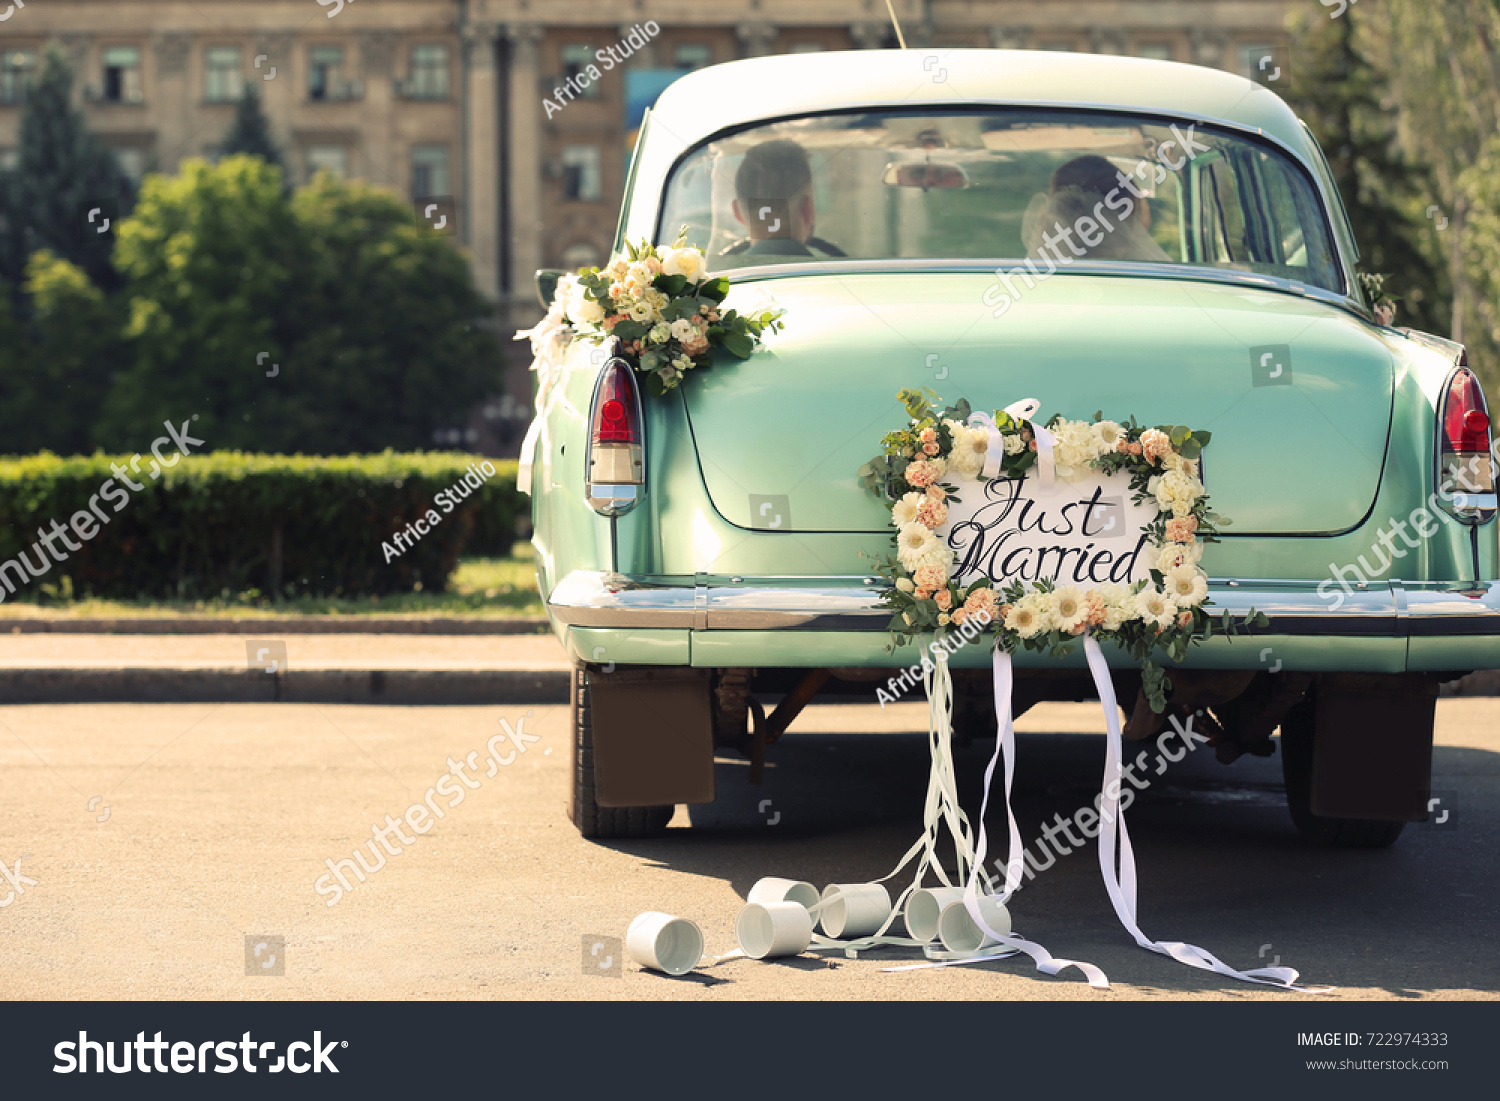 Wedding couple in car decorated with plate JUST MARRIED and cans outdoors #722974333